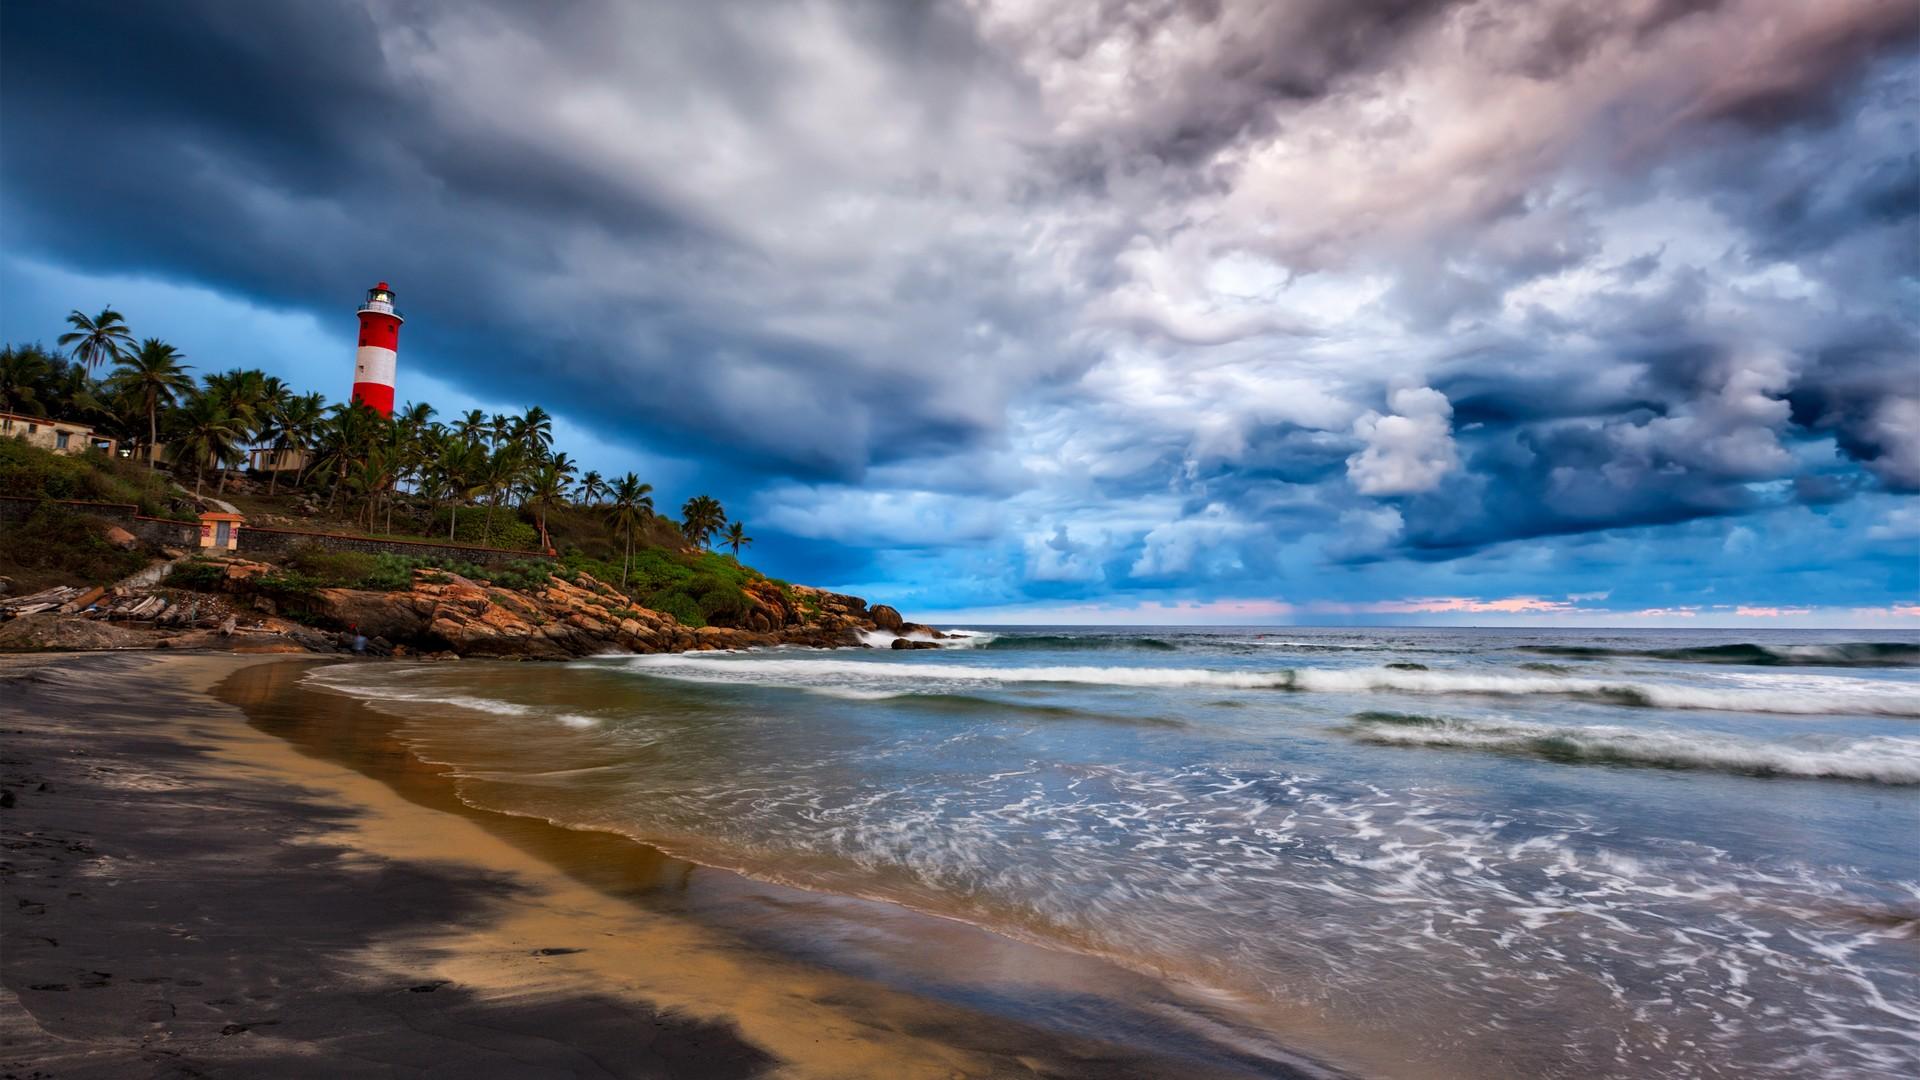 Beach and architecture near Kovalam on a cloudy day